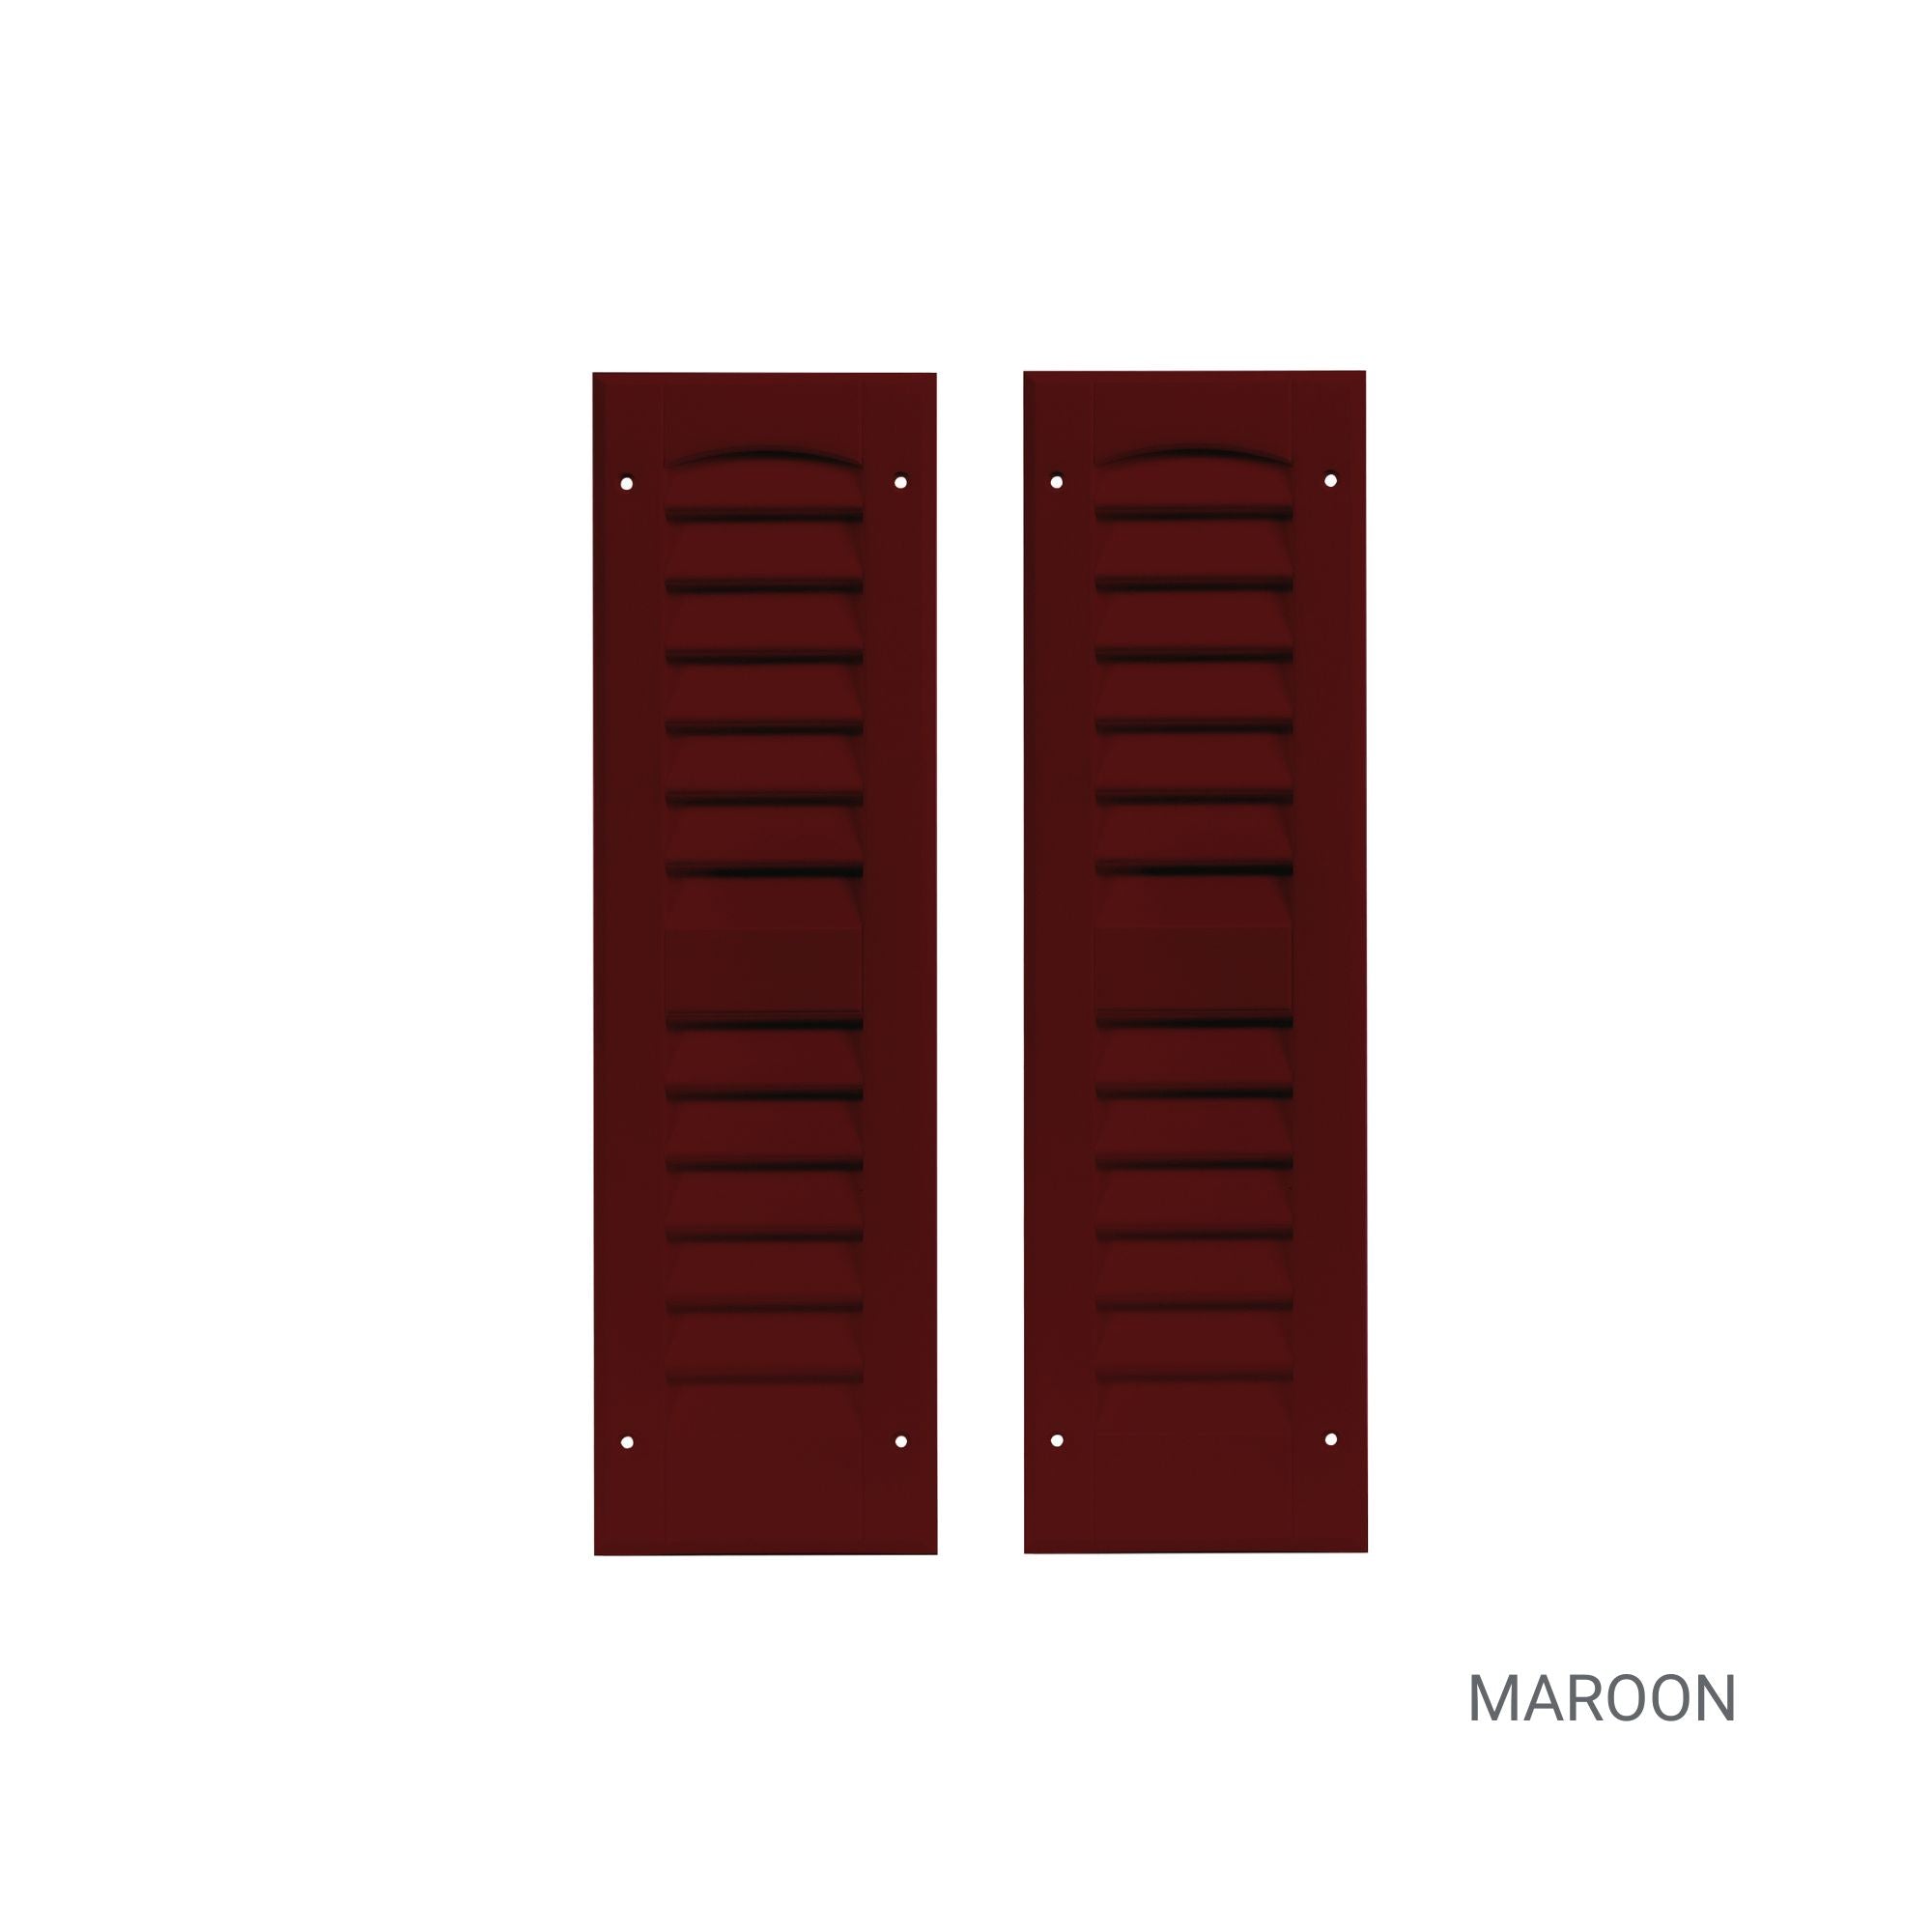 Pair of 6" W x 21" H Louvered Maroon Shutters for Sheds, Playhouses, and MORE